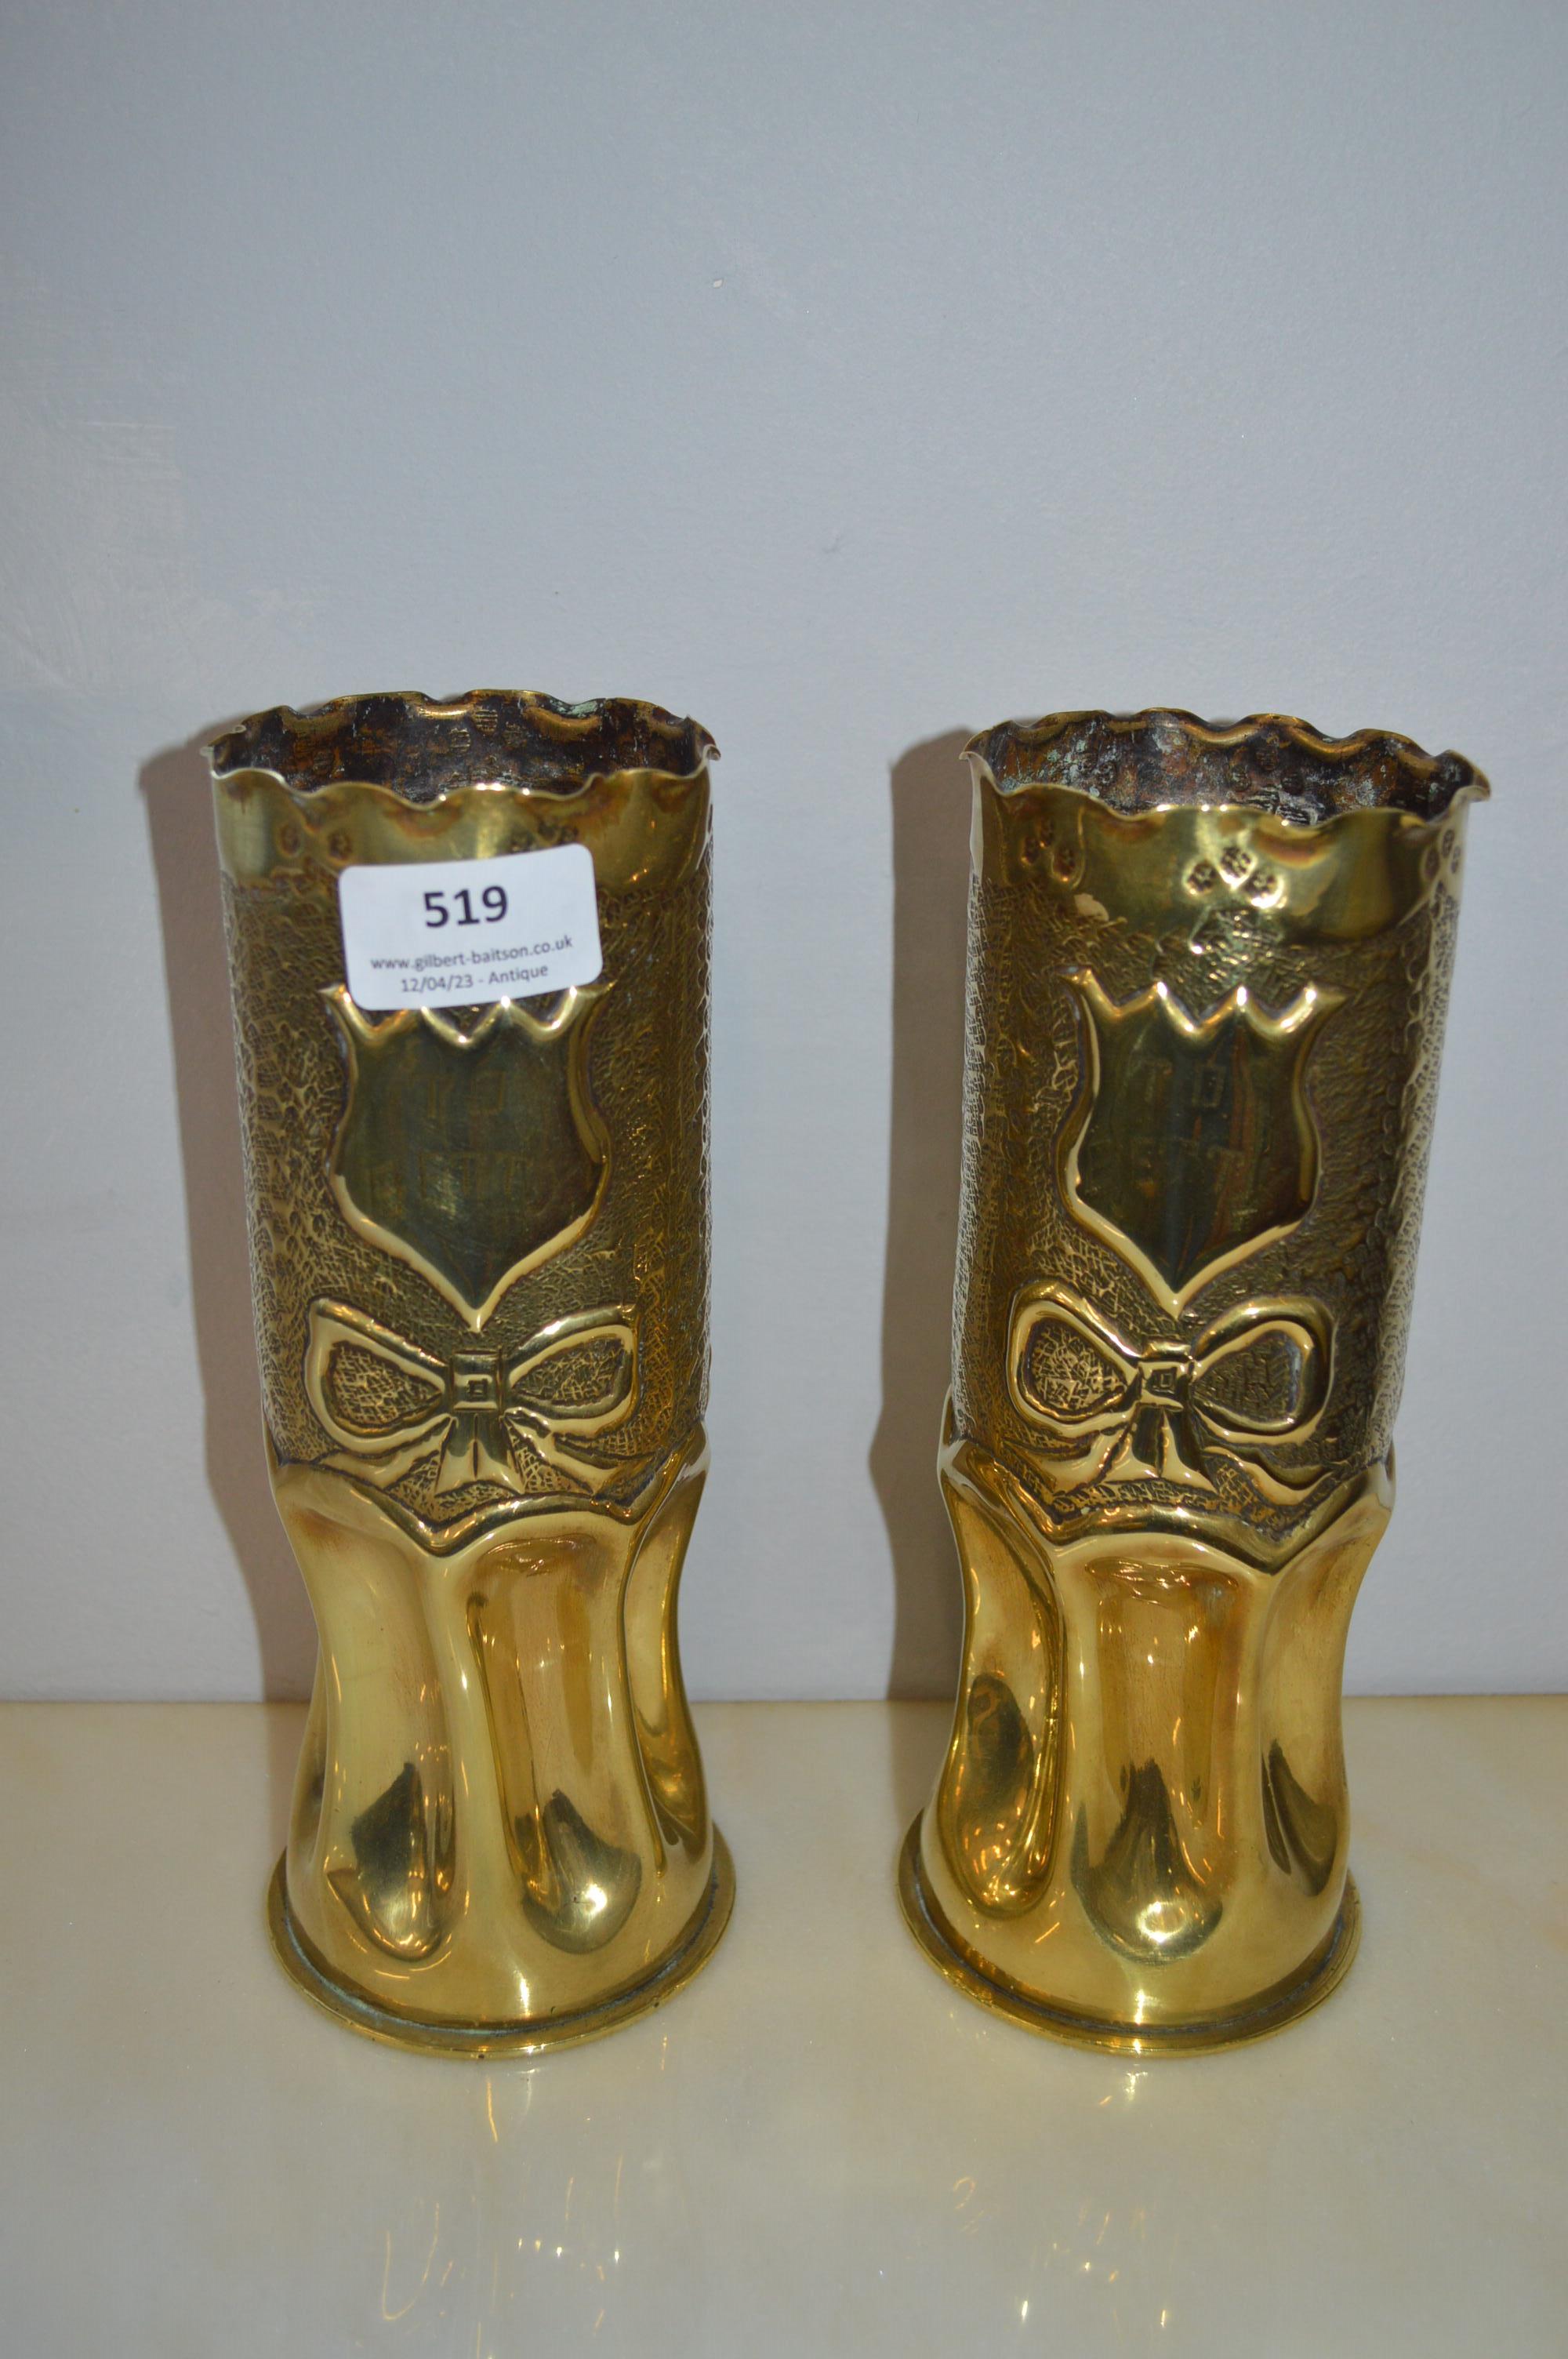 Pair of Trench Art Shell Cases